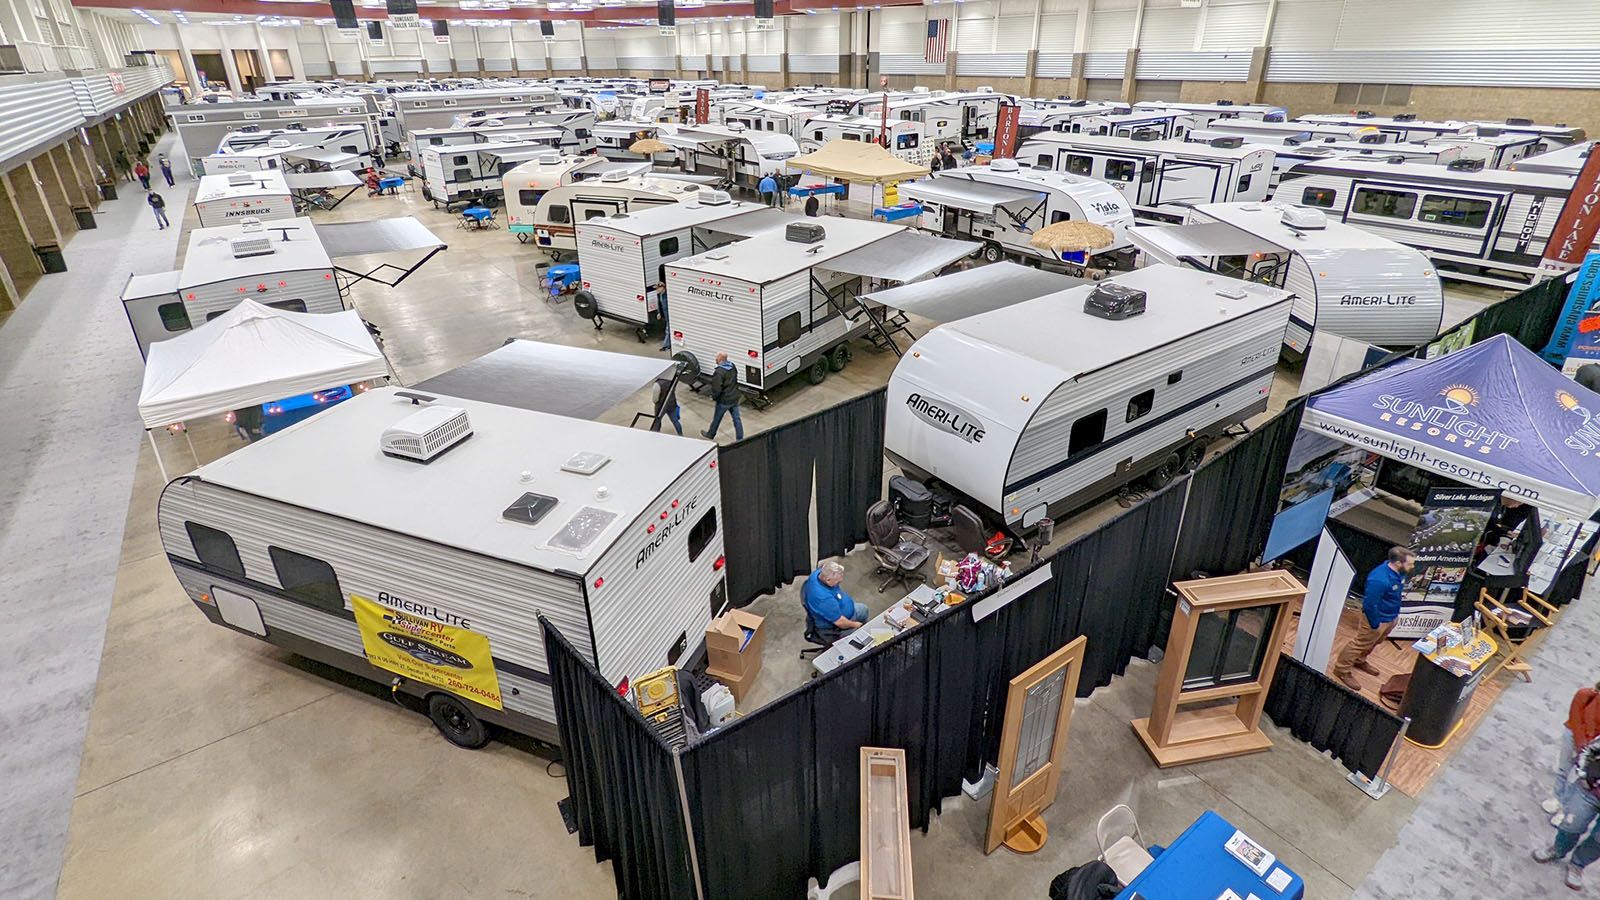 The Fort Wayne RV & Camping Show will be at Memorial Coliseum from Feb. 2-5.